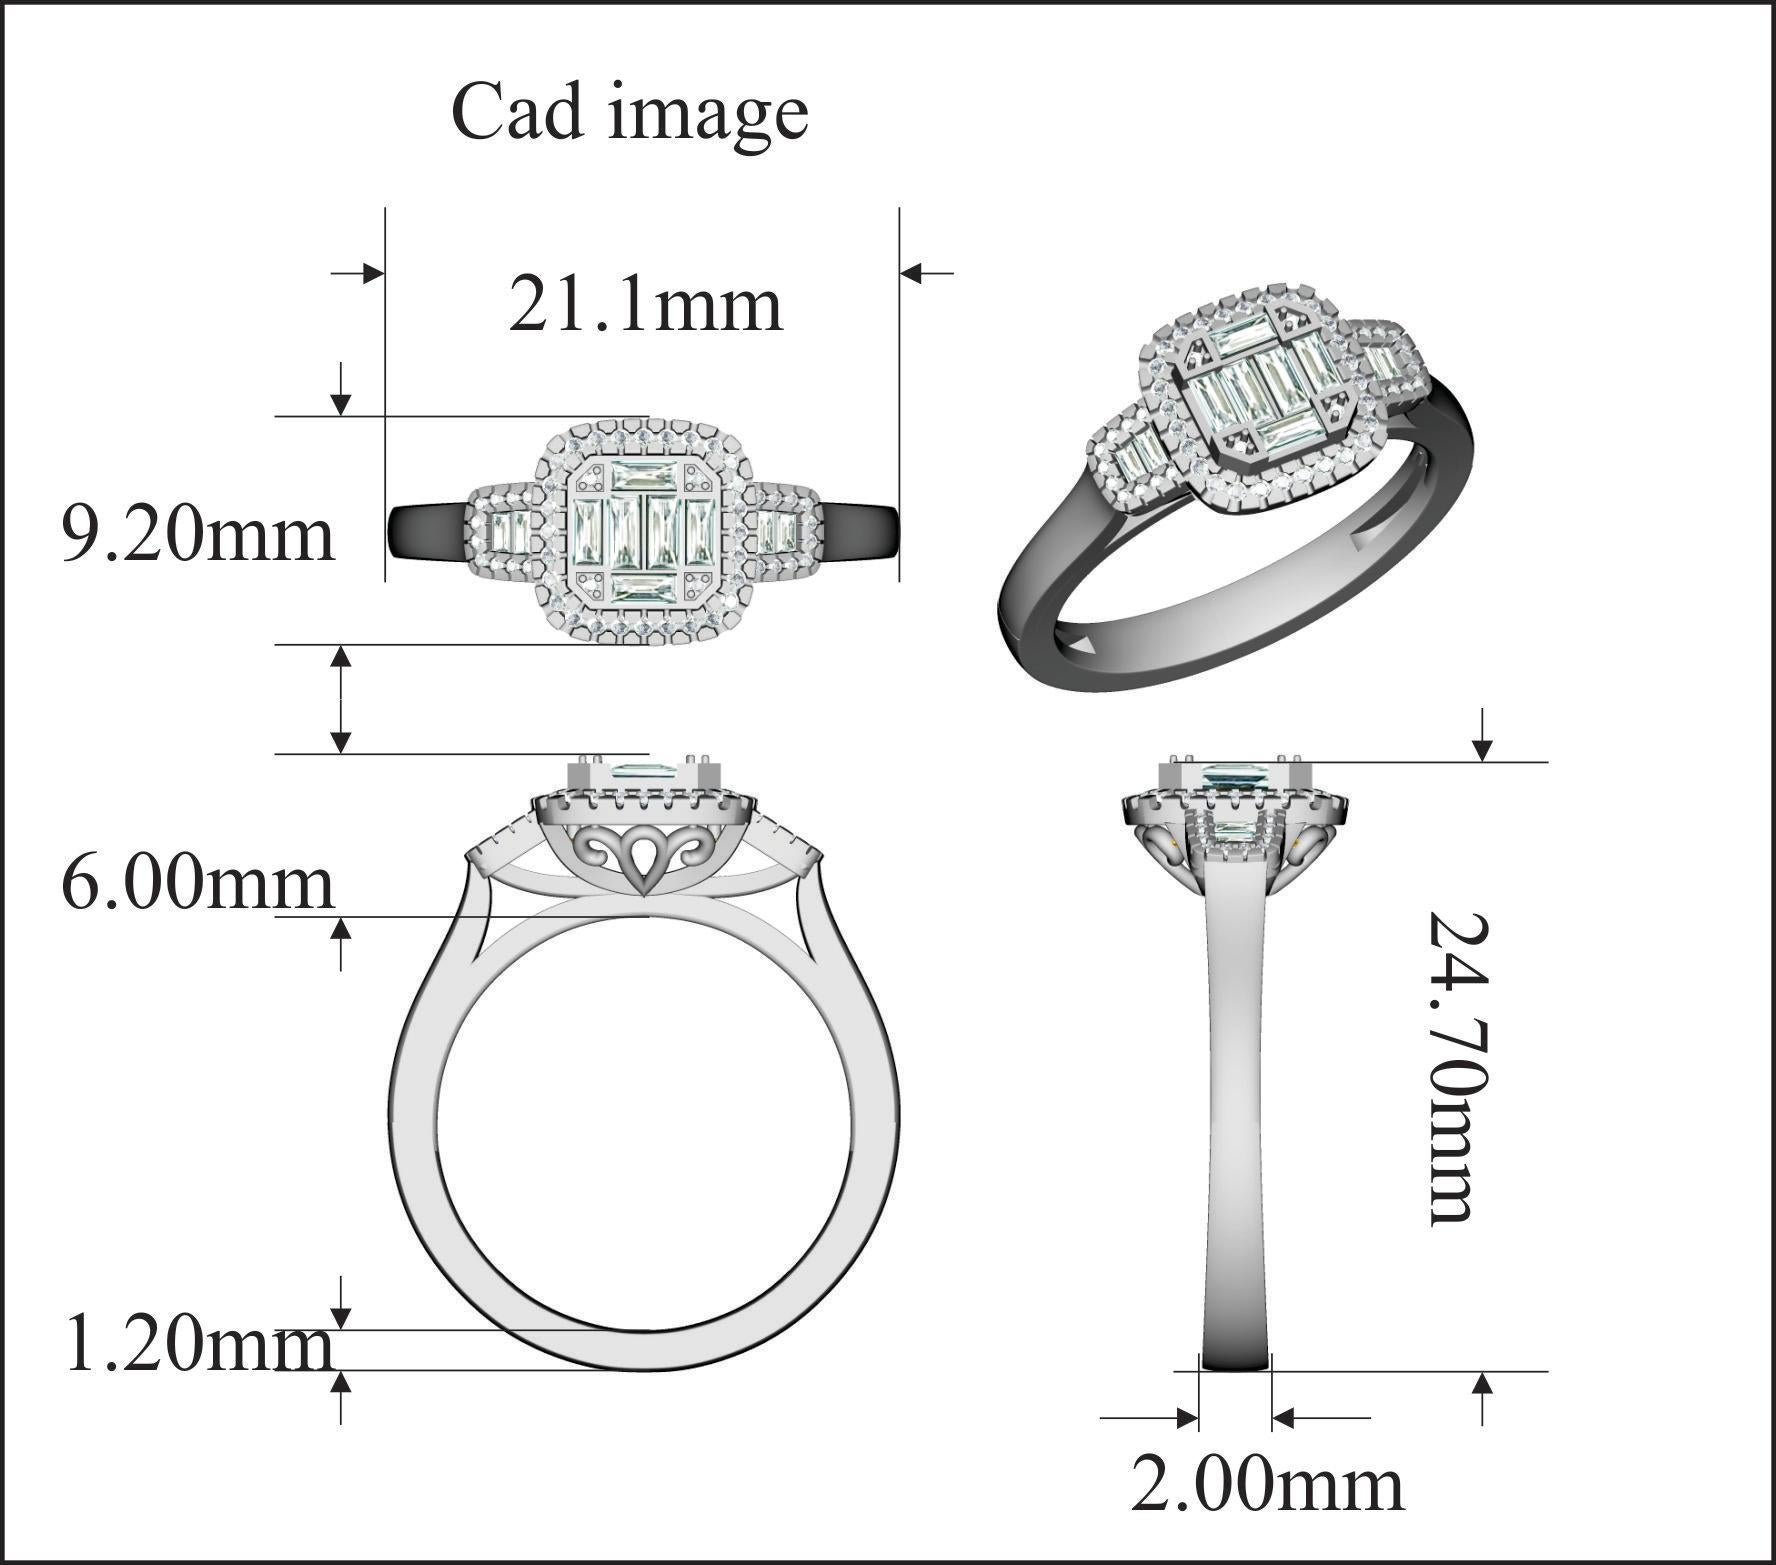 Modern and mesmerizing, these cluster halo diamond diamond ring are an eye catchy look for any occasion. Embedded with 52 round and 10 baguette diamonds set in pave, channel and microprong setting and dazzles in H-I color I2 clarity. Crafted by our